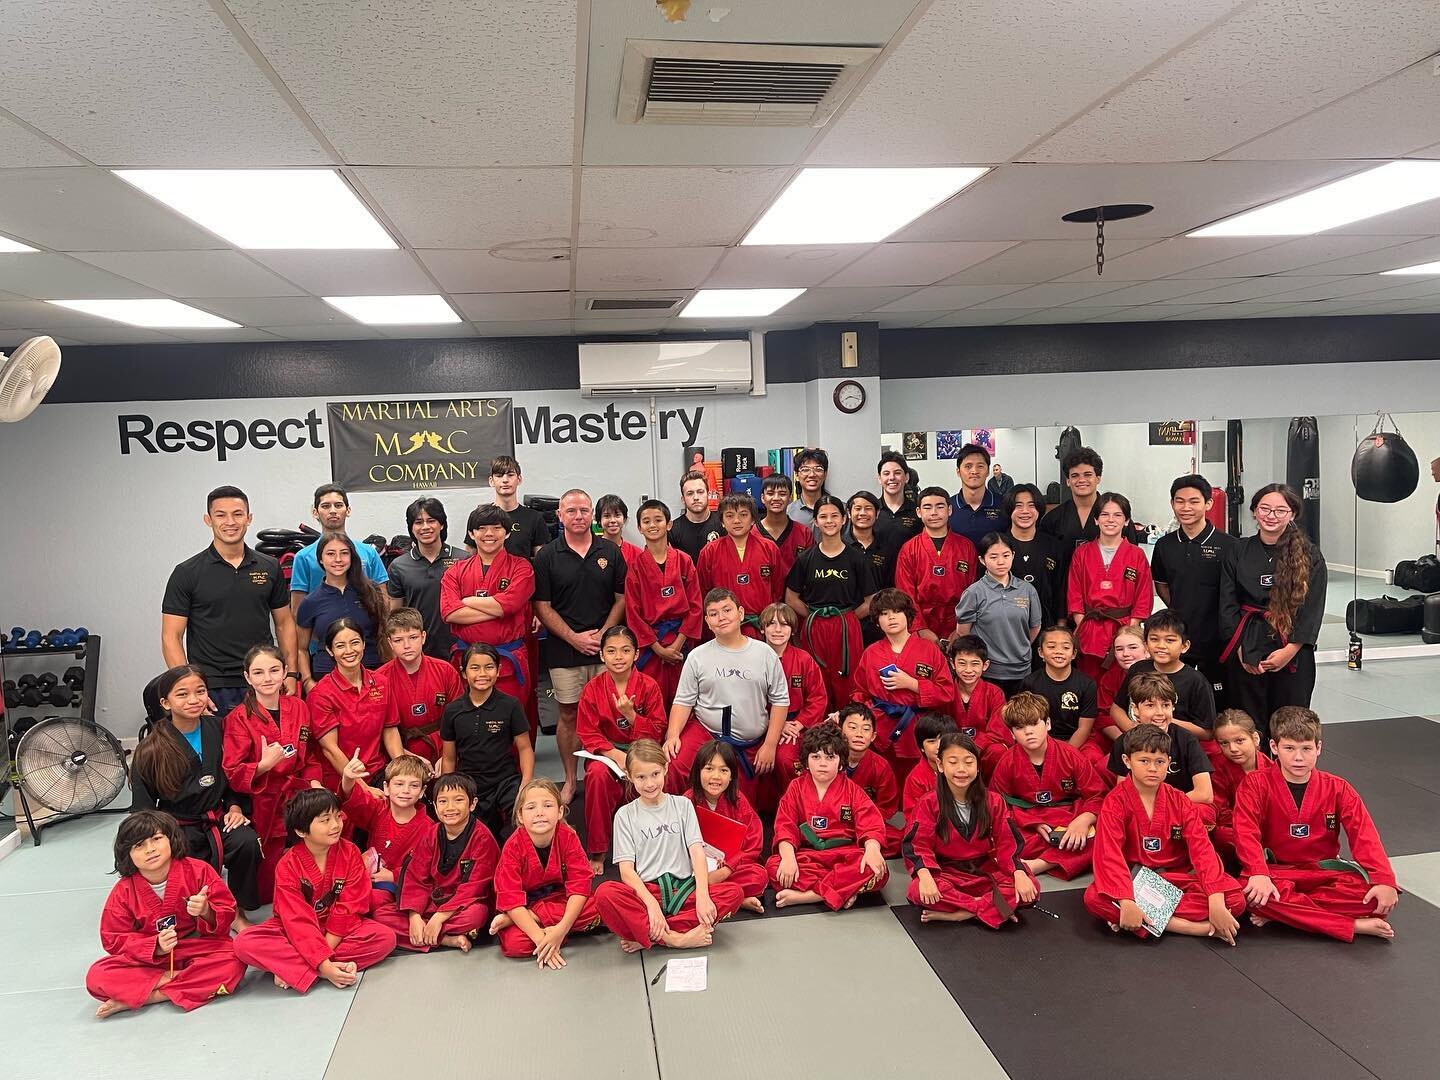 It was an honor and pleasure having Colonel Matt Seay as a guest speaker today for leadership class. Mahalo, sir! 🥋#martialartscompany